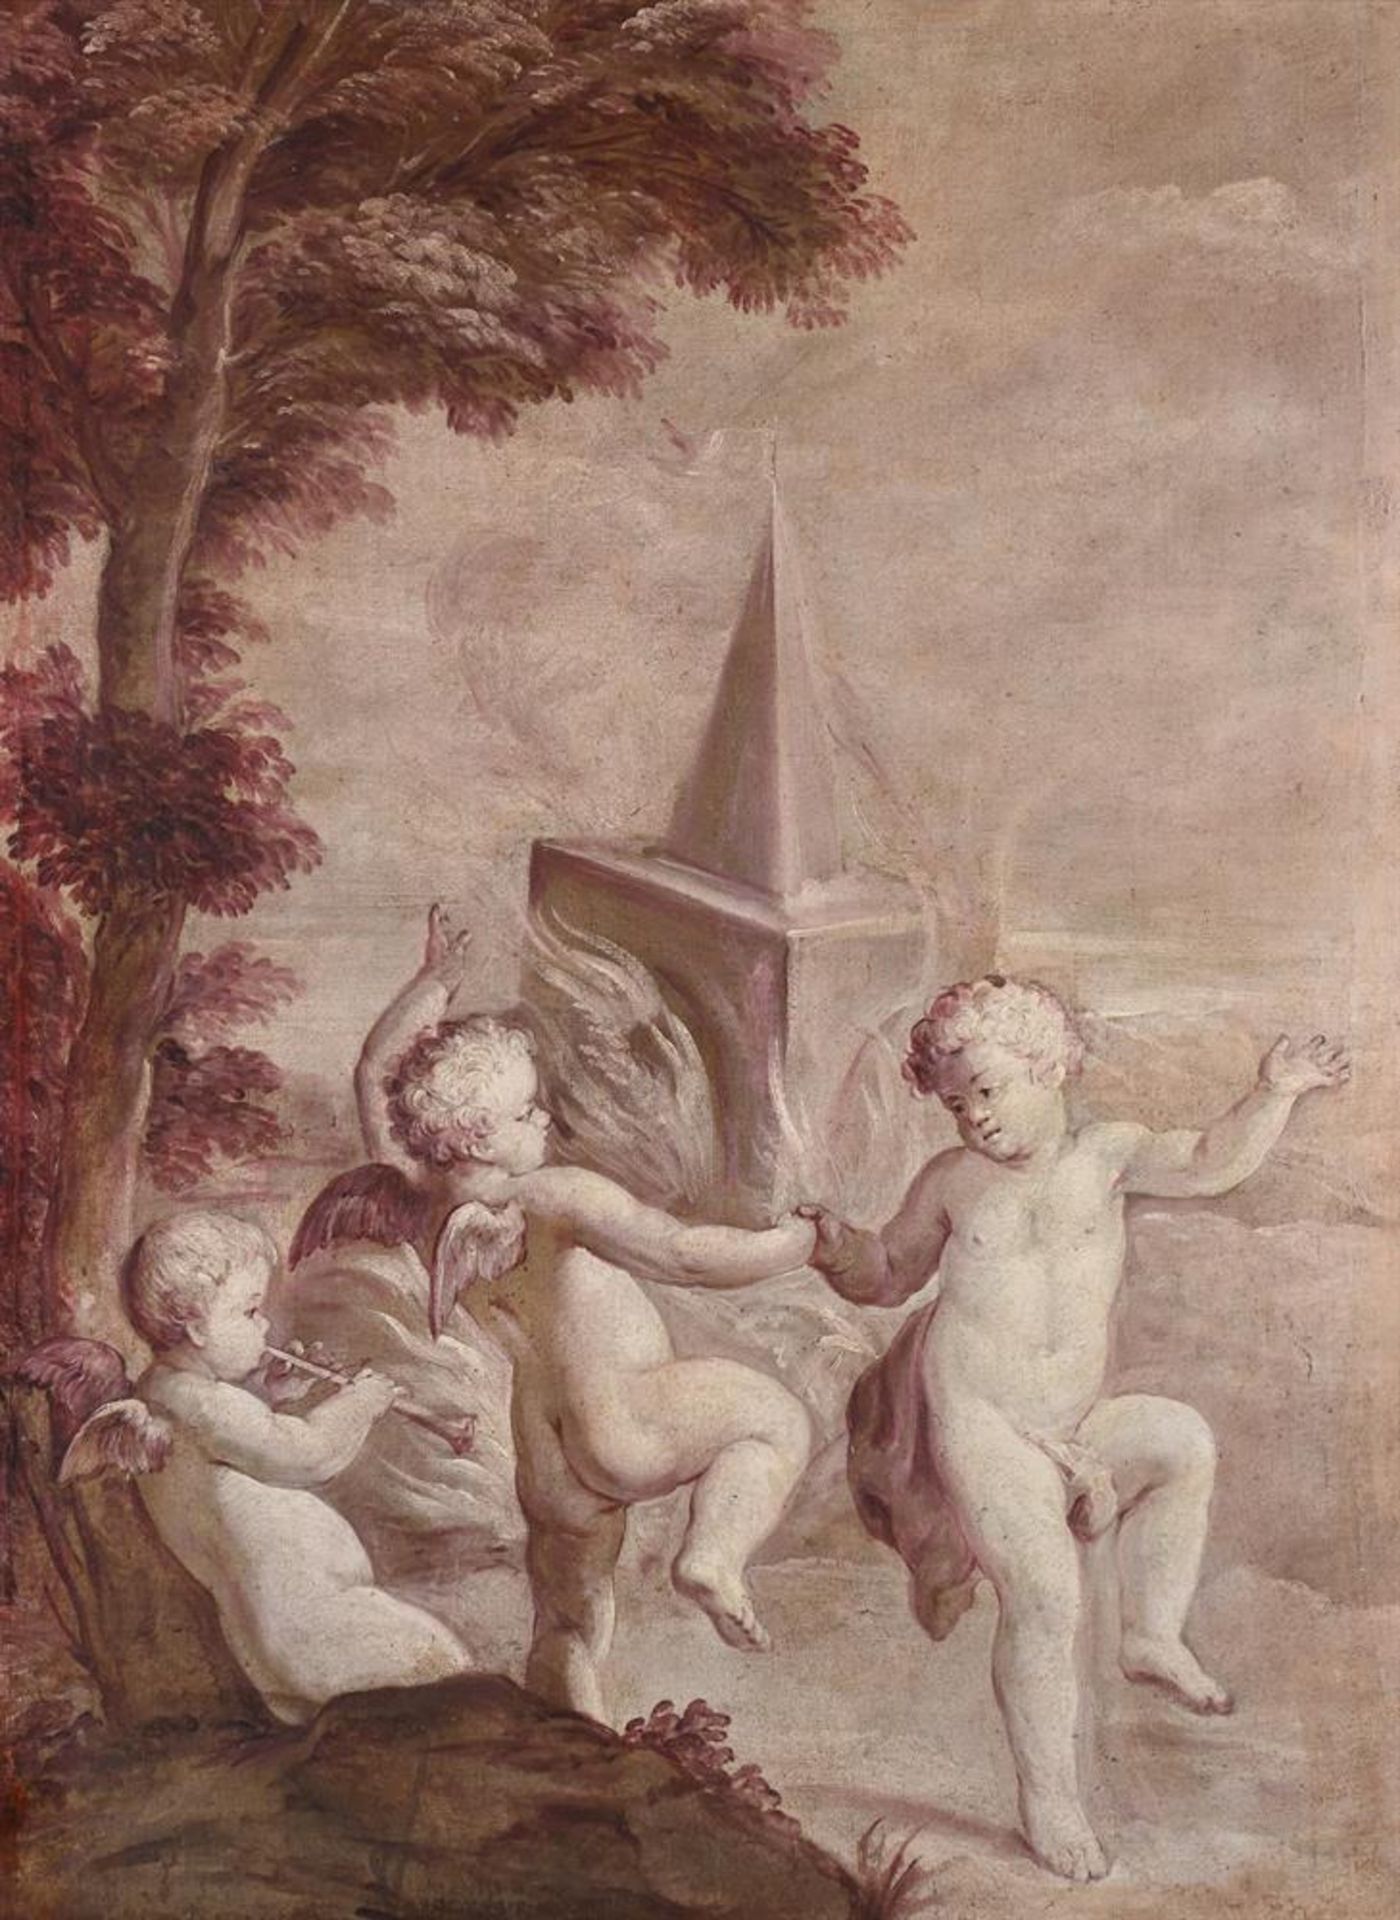 FOLLOWER OF JACOB DE WITT, PUTTI EMBLEMATIC OF THE FOUR CLASSICAL ELEMENTS - Image 3 of 13